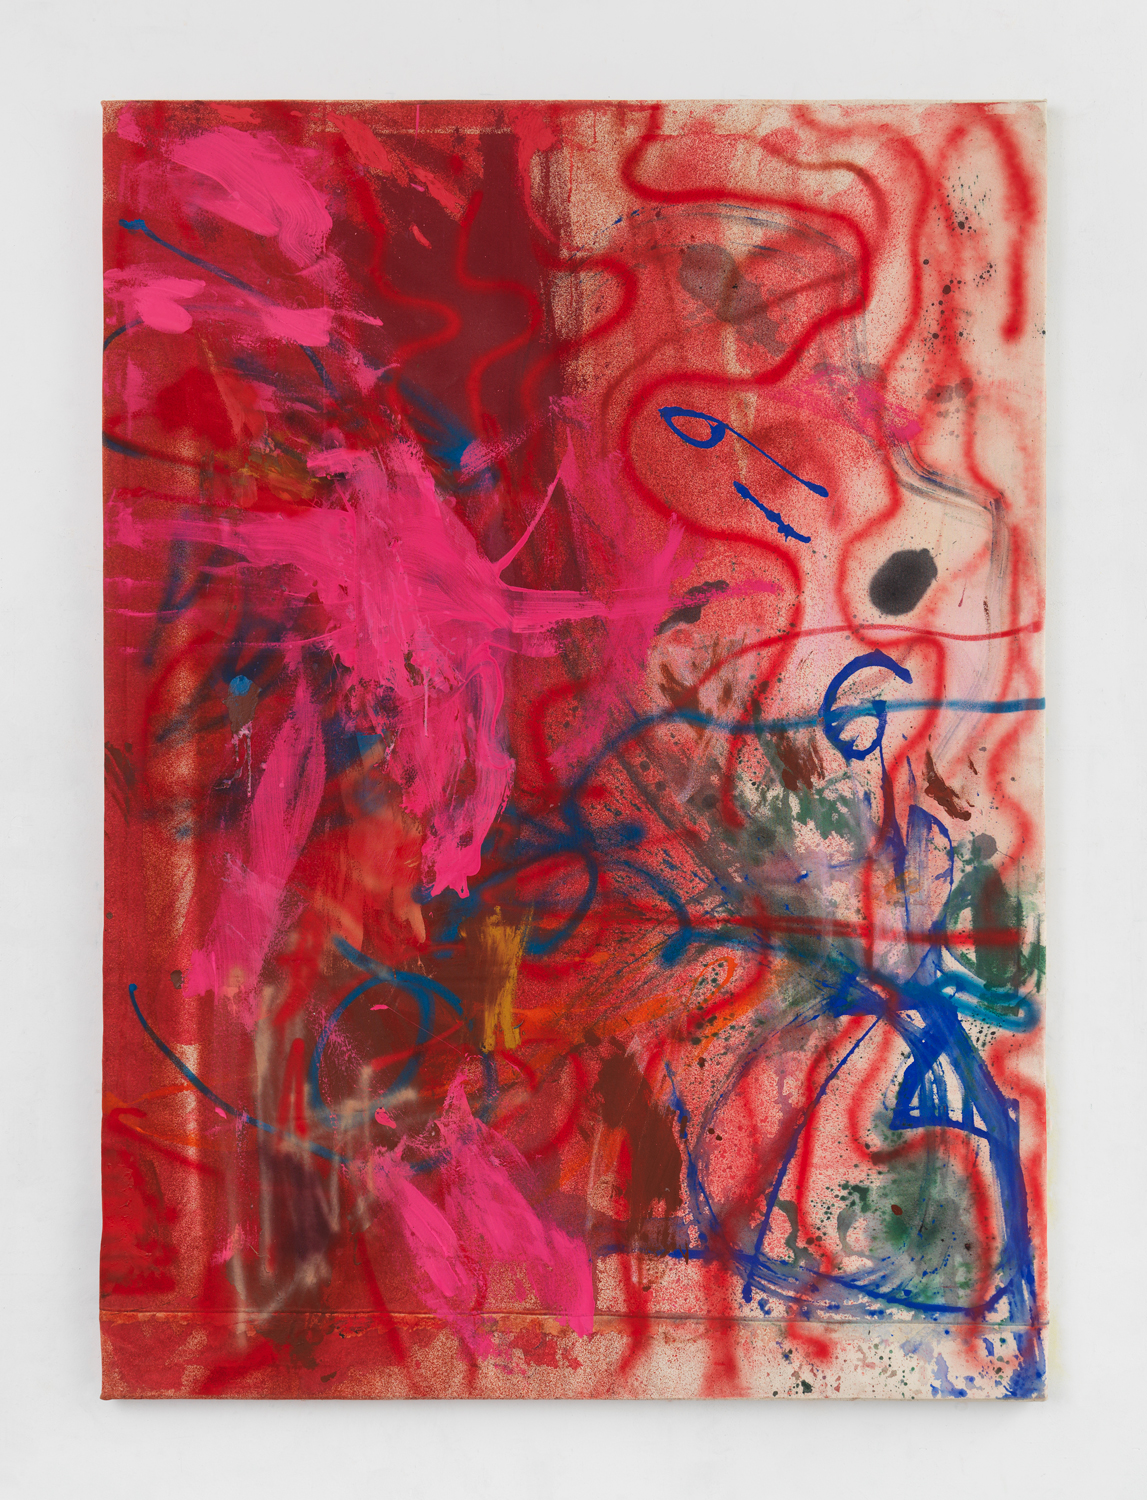 Bill Saylor, Flipper, 2015, Oil, flashe, and spray paint on canvas, 84 x 64 in.